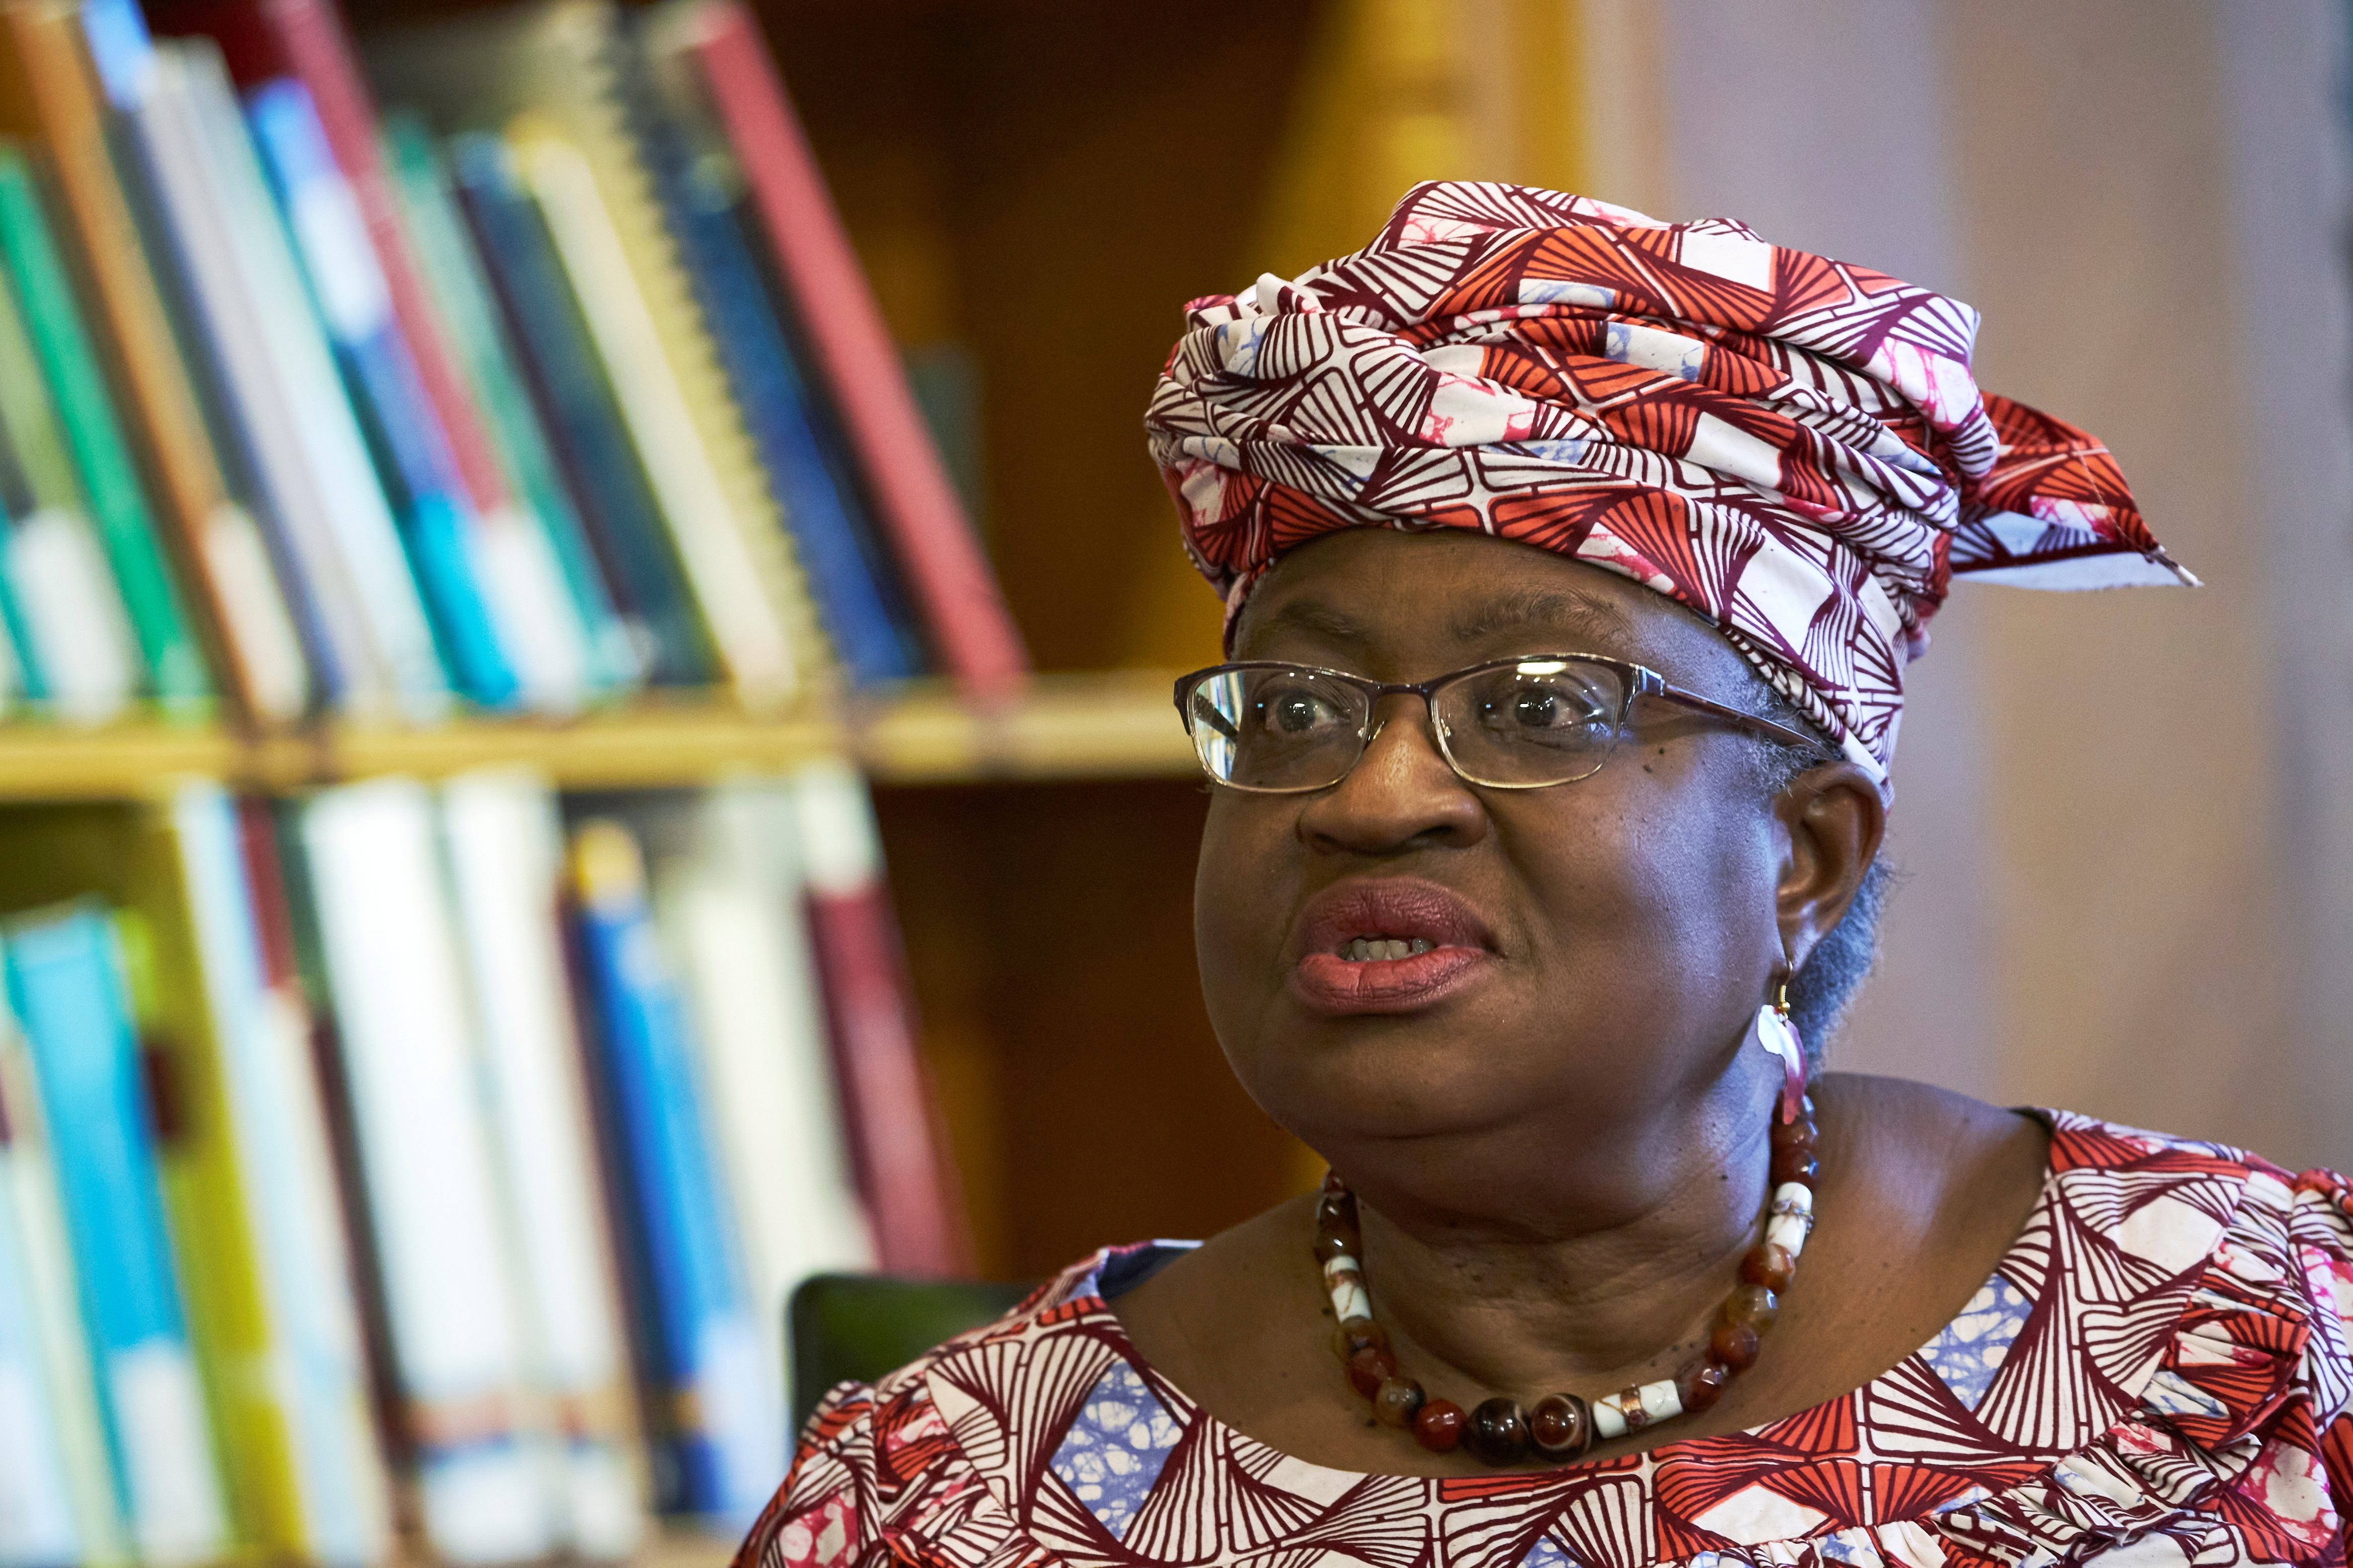 World Trade Organization (WTO) Director-General Ngozi Okonjo-Iweala speaks during an interview for Reuters Next, ahead of the 12th Ministerial Conference (MC12), in Geneva, Switzerland, November 25, 2021. REUTERS/Denis Balibouse/File Photo